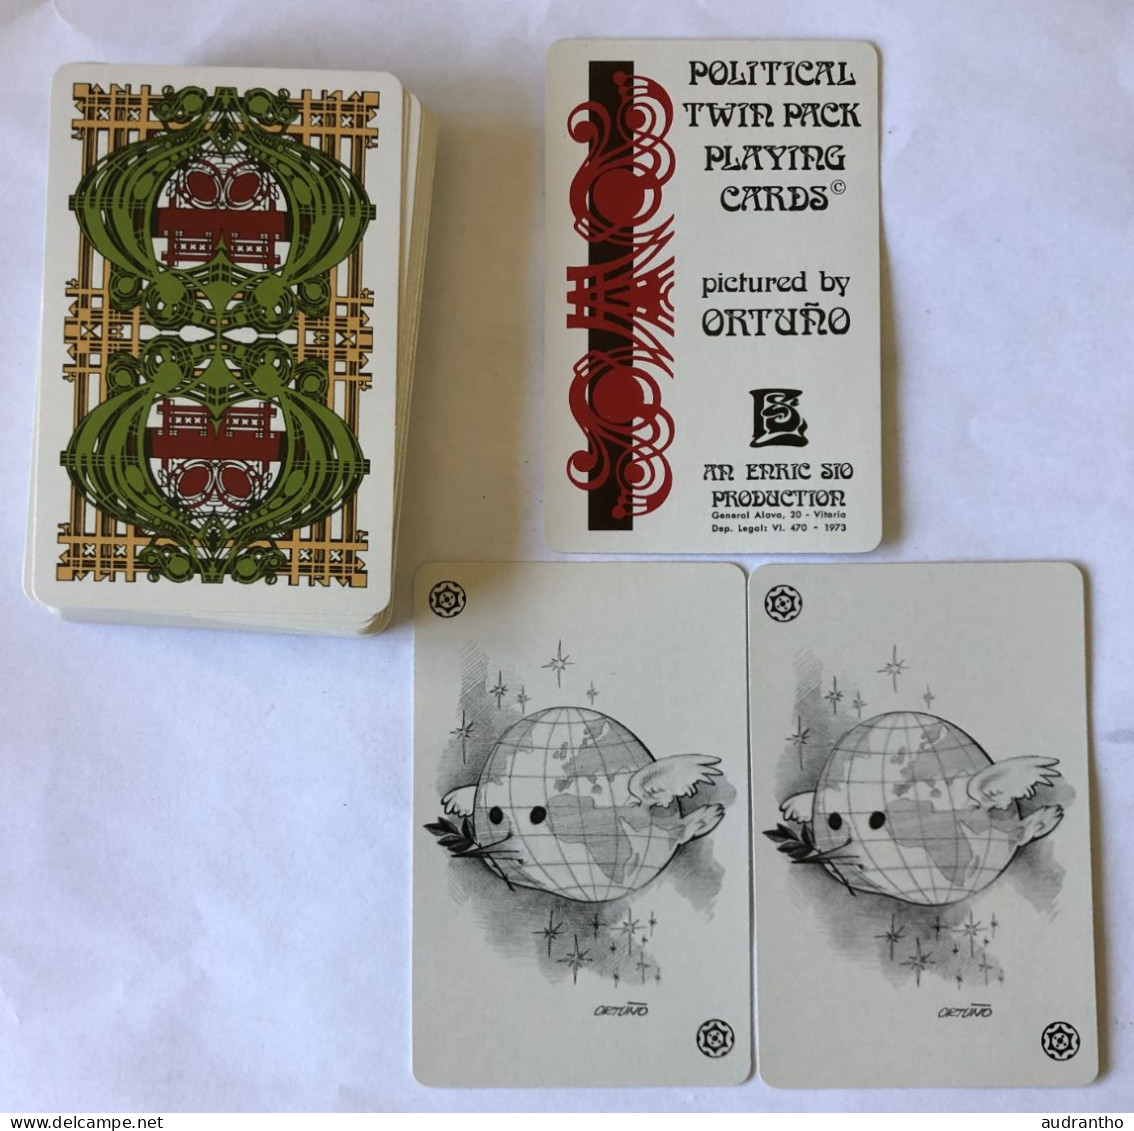 Très Beau Double Jeu 54 Cartes 1973 - Caricature Personnalité - Political Twin Pack Playing Cards By ORTUNO - Erric Sio - 54 Kaarten